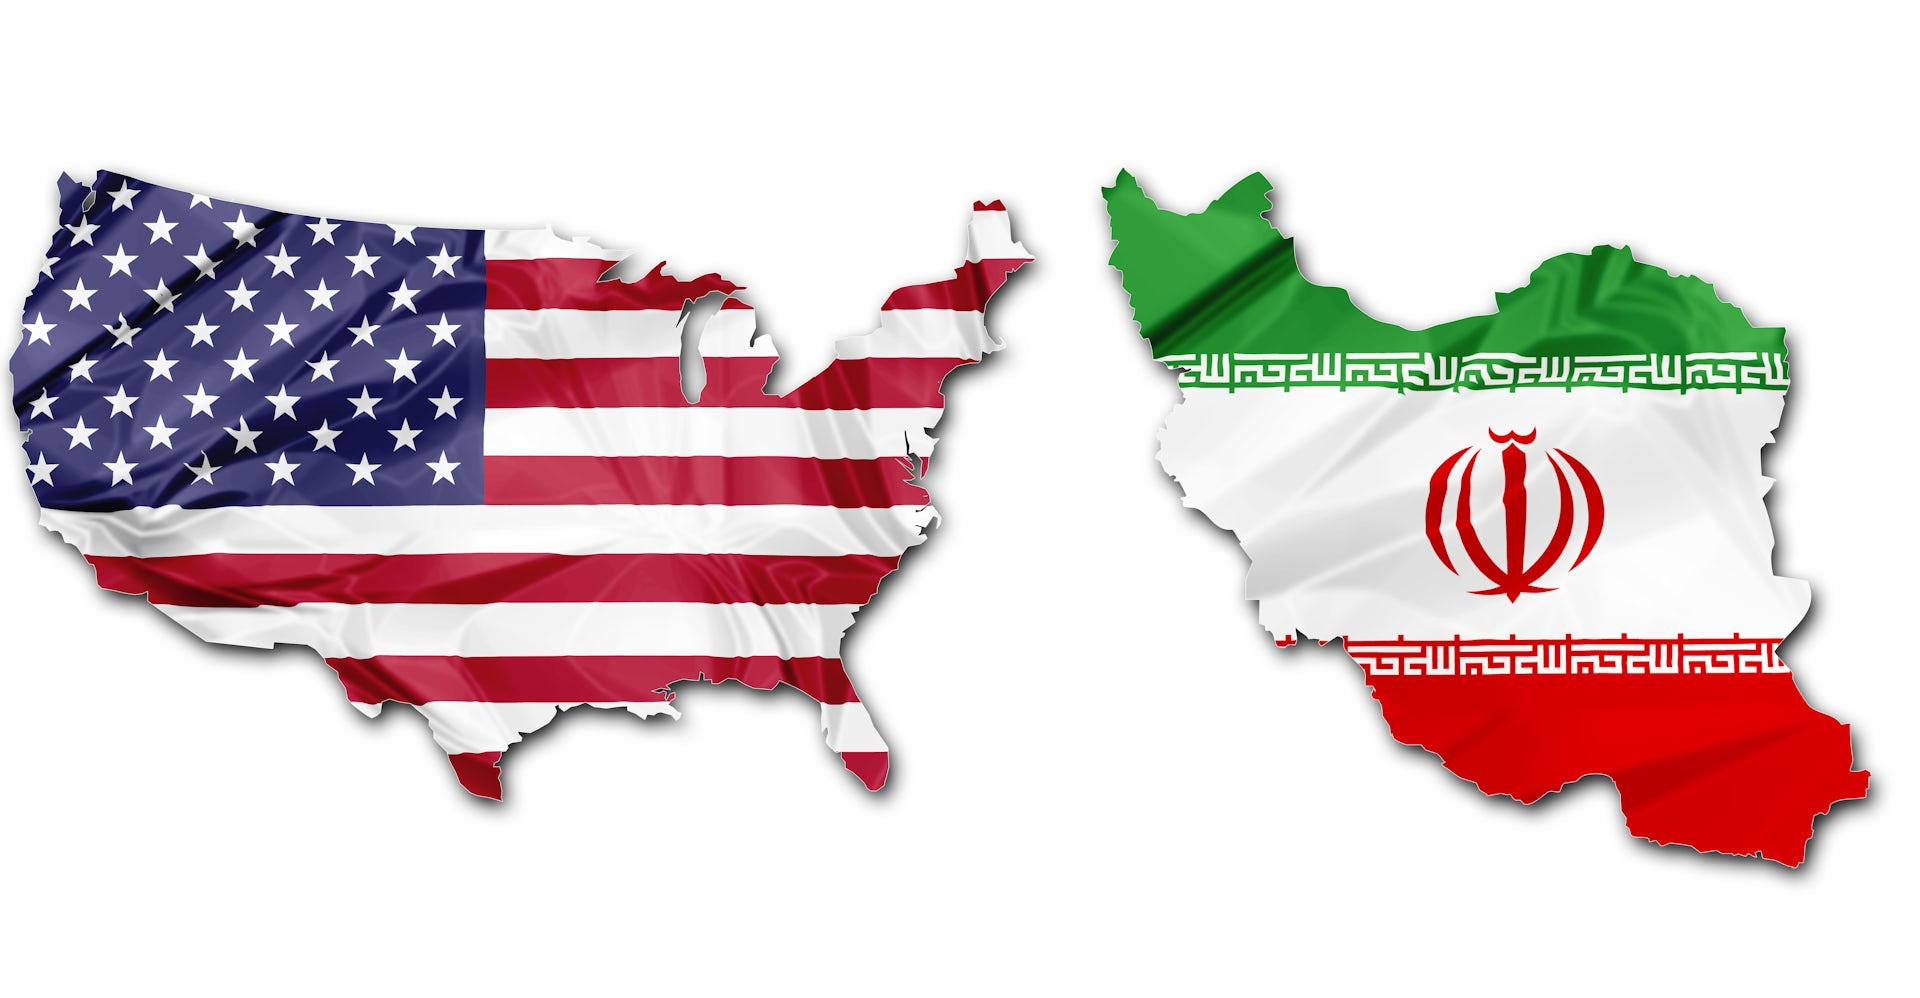 U.S. and Iran Have a Long, Troubled History